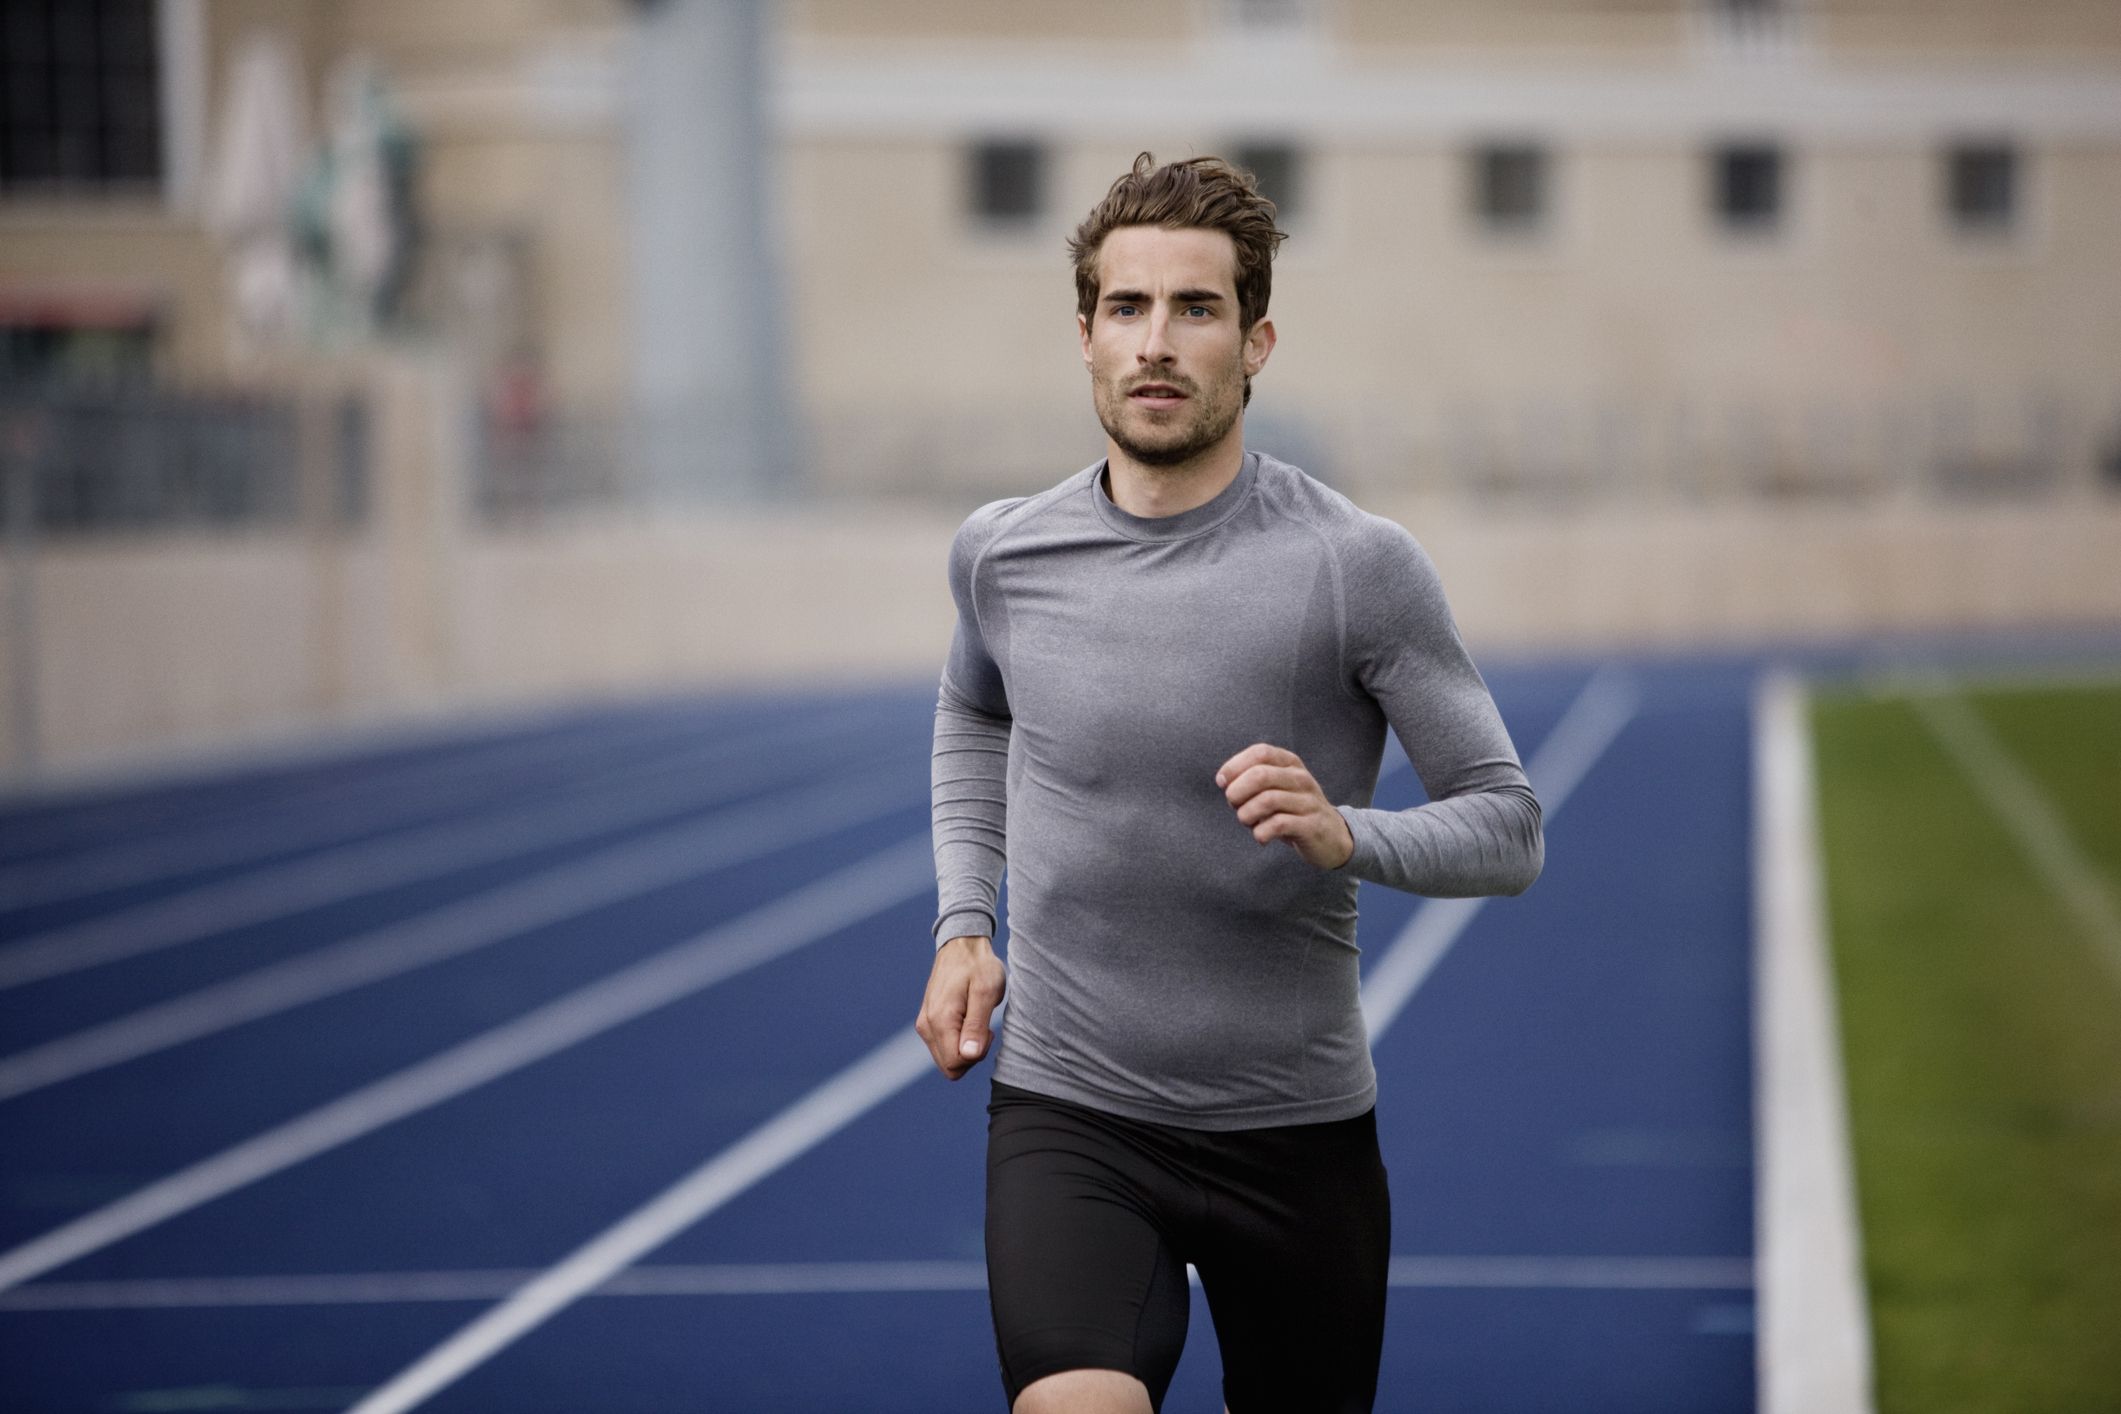 How to Run Faster  How to run faster, How to sprint faster, Speed workout